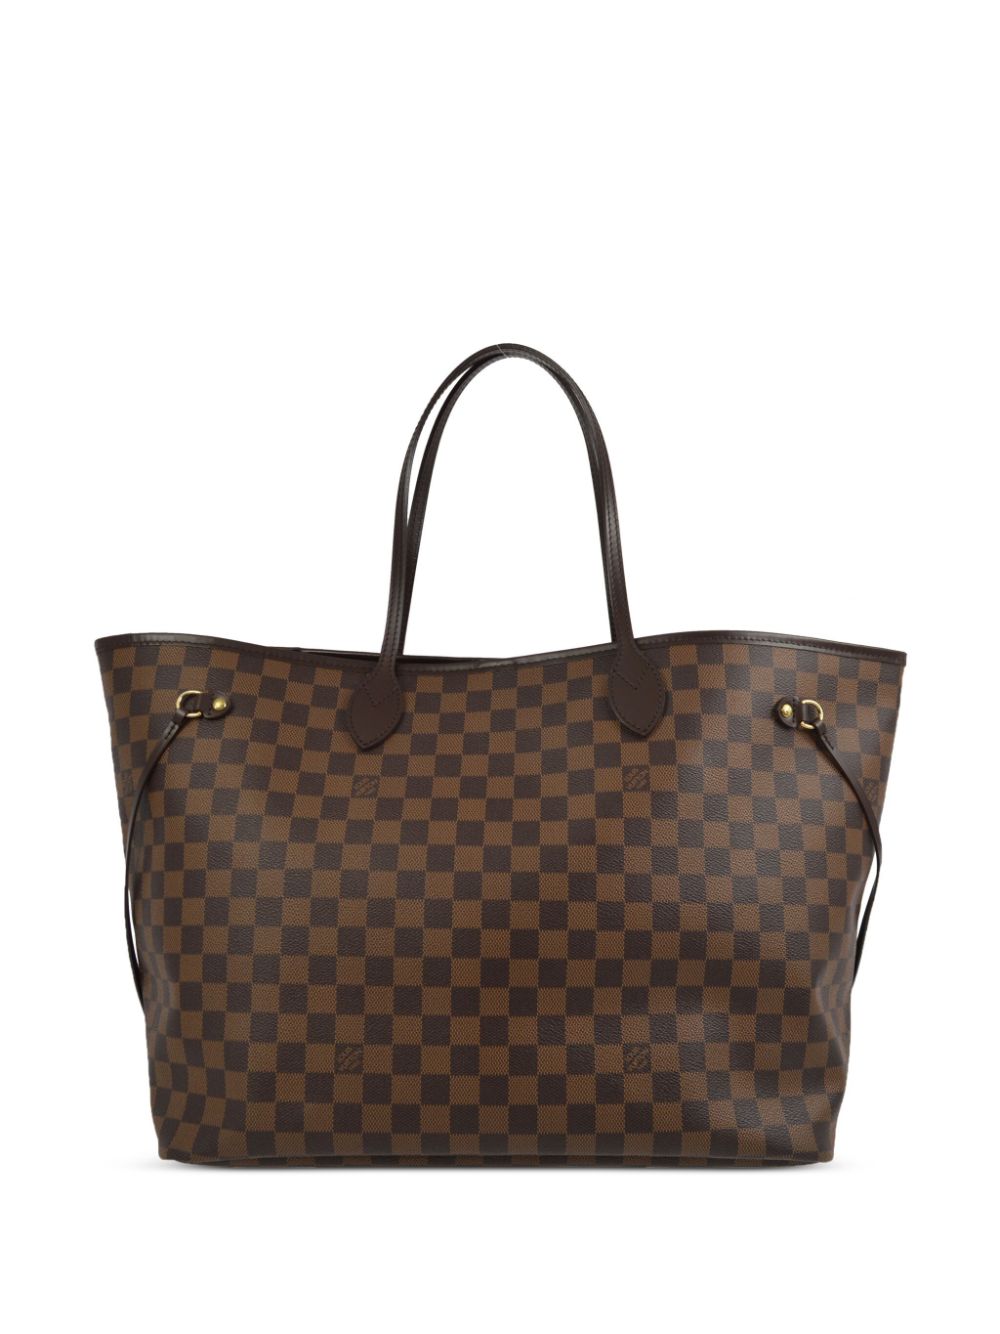 Louis Vuitton Pre-Owned 2009 Neverfull GM Handtasche - Braun von Louis Vuitton Pre-Owned